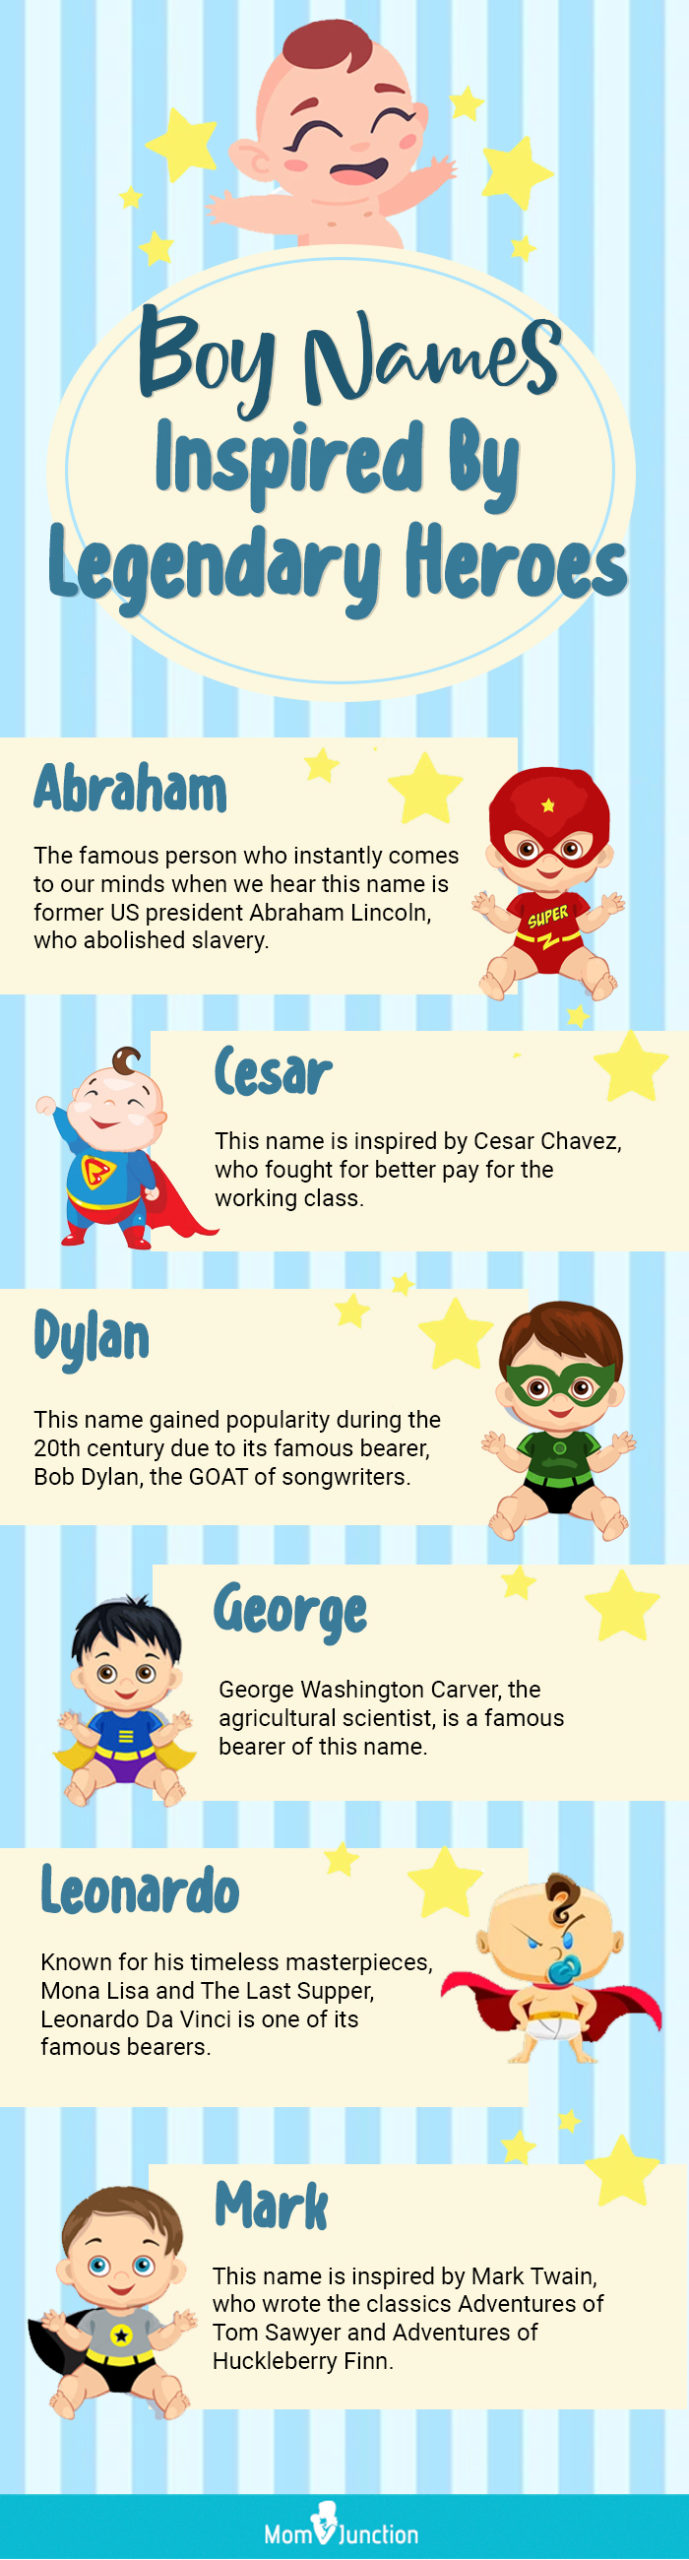 boy names inspired by legendary heroes [infographic]